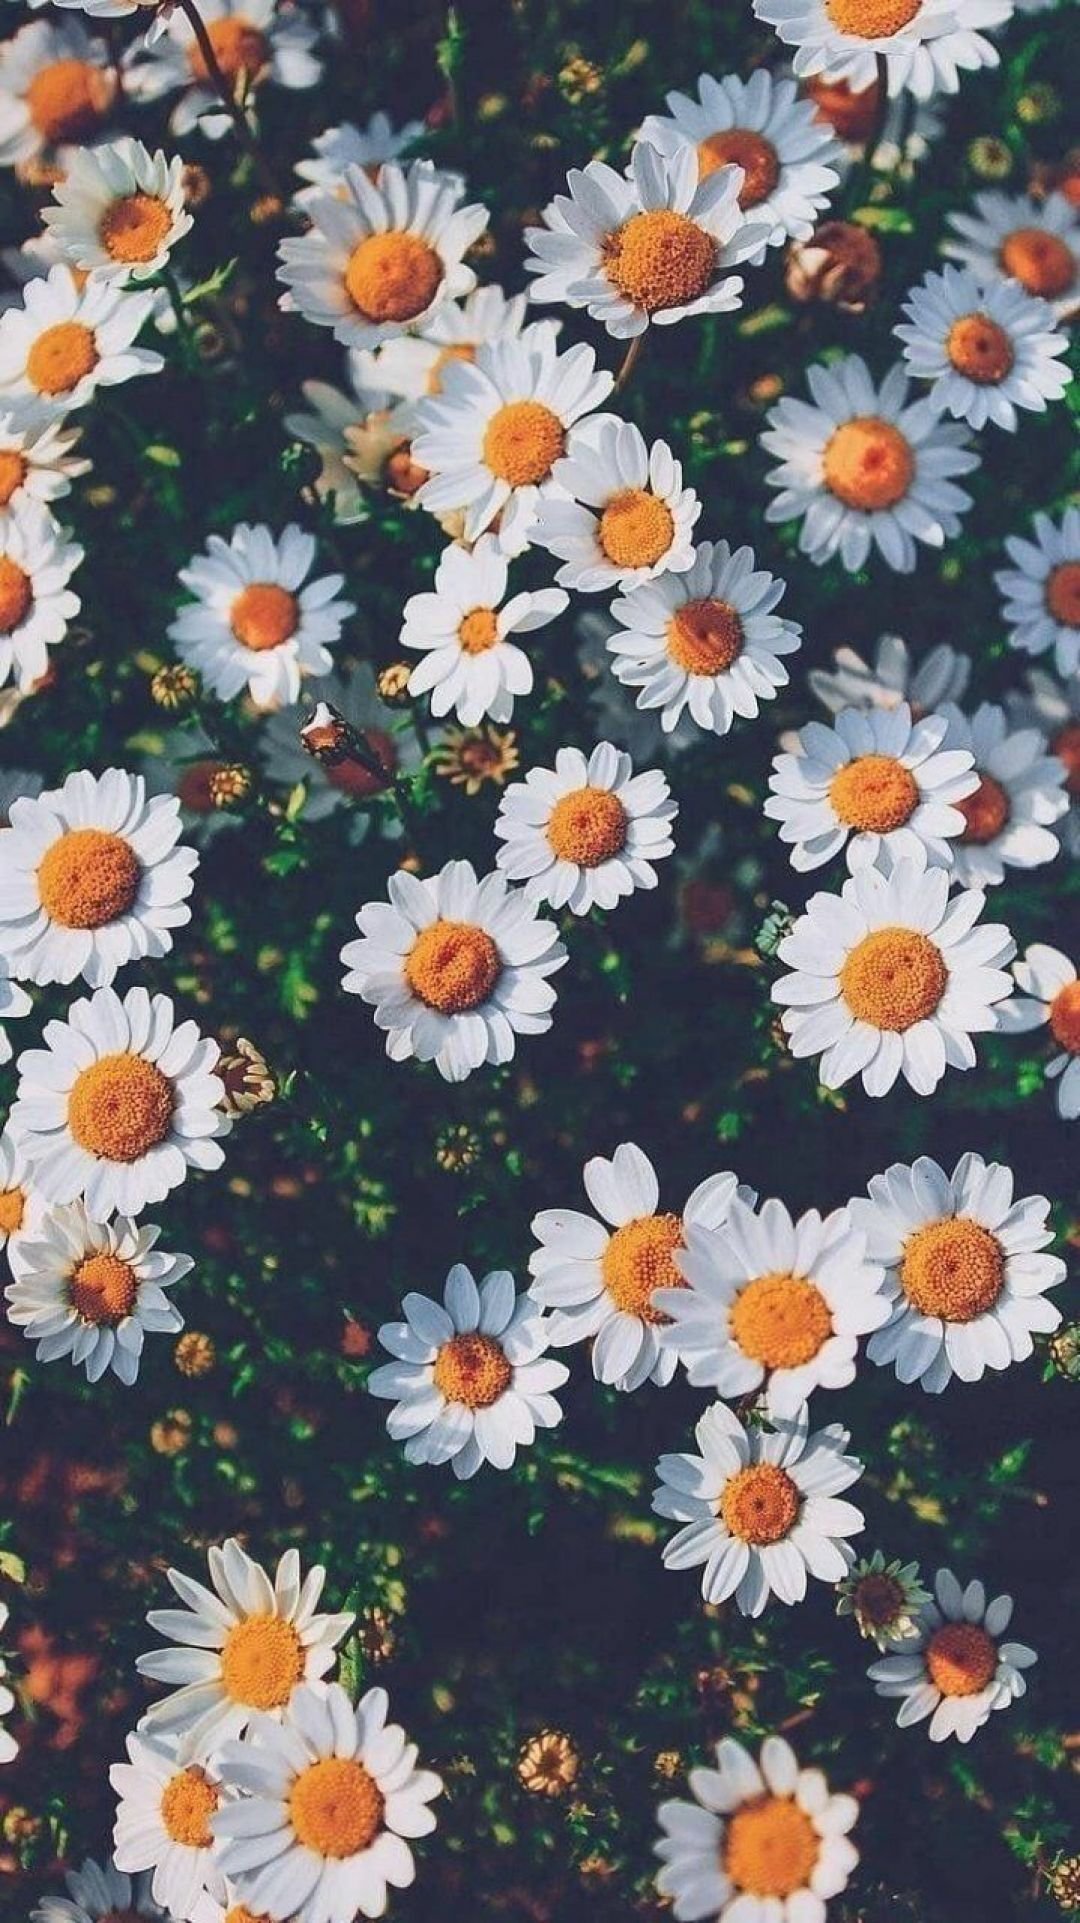 Daisy Photos, Download The BEST Free Daisy Stock Photos & HD Images